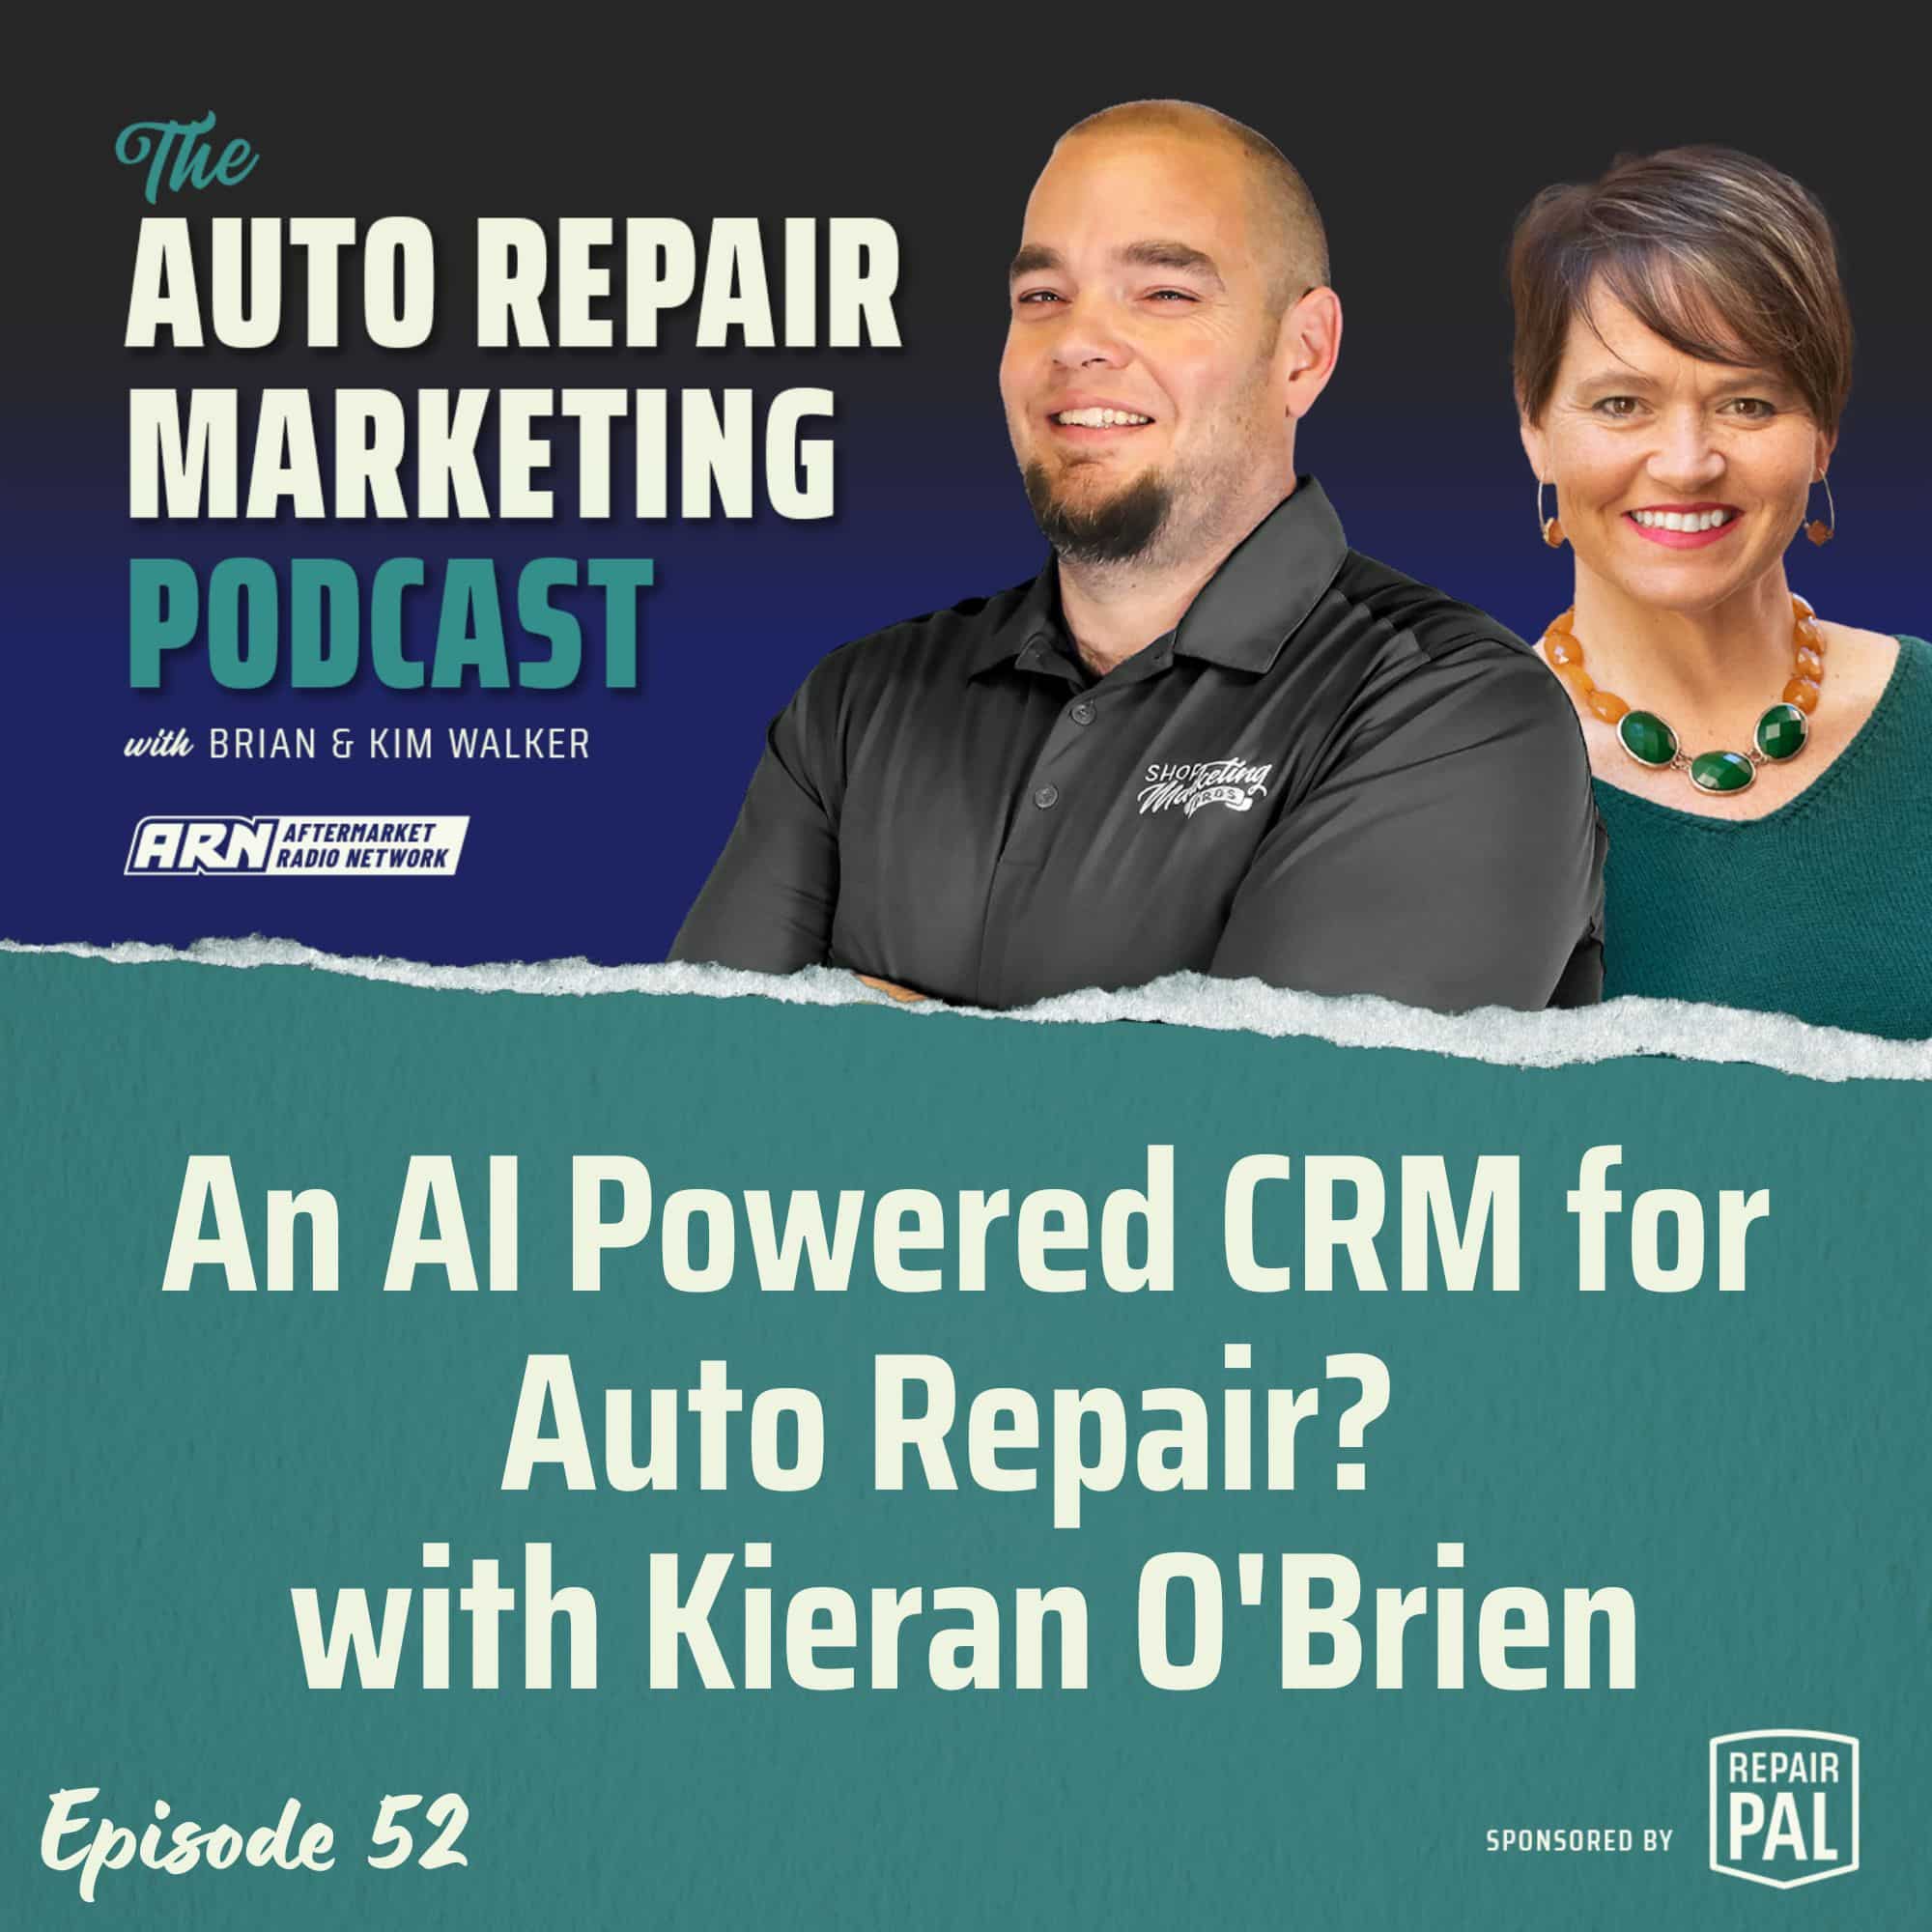 The Auto Repair Marketing Podcast Episode 52. Brian & Kim Walker talking about the topic "An AI Powered CRM for Auto Repair? With Kieran O'Brien". Sponsored by Repair Pal.